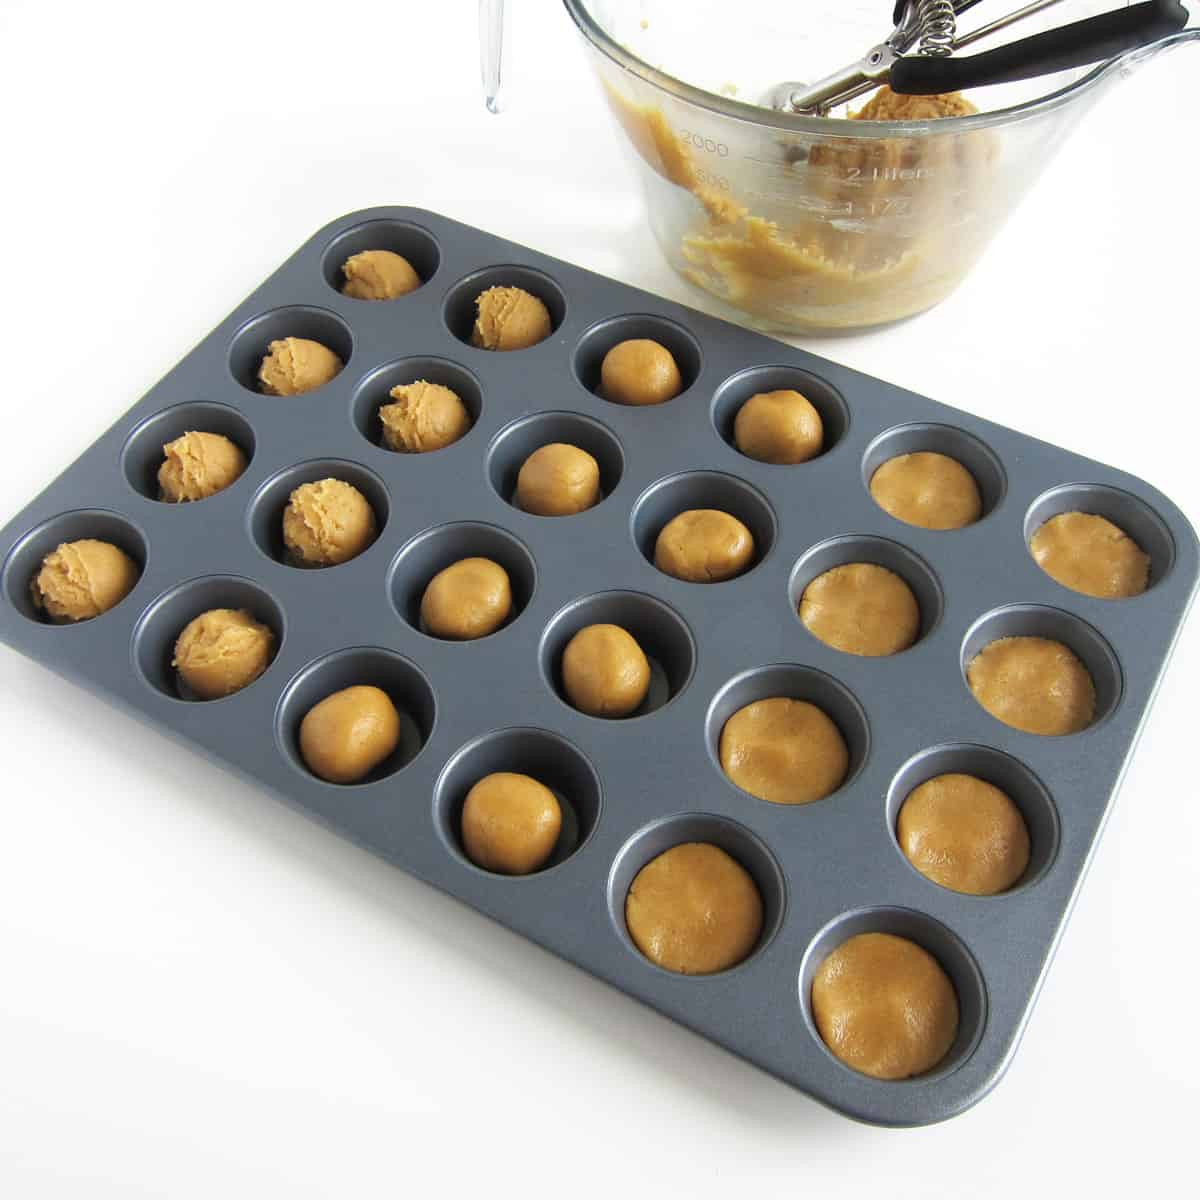 Mini muffin cup filled with peanut butter fudge scoops, balls, and flattened balls.